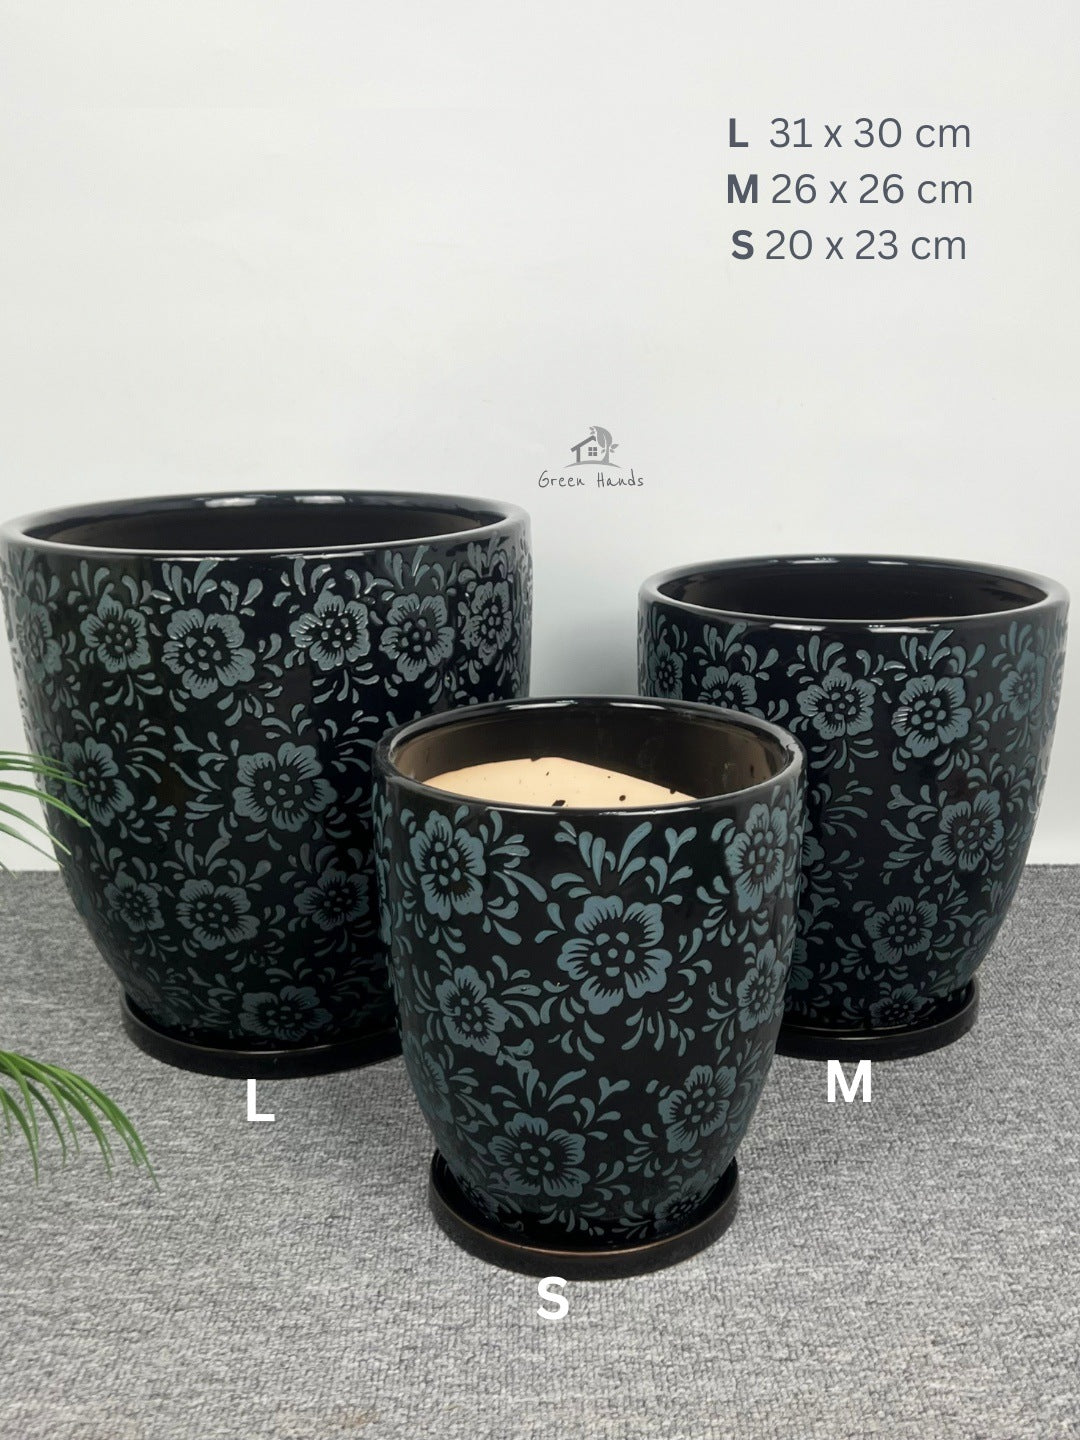 Japanese Art-Inspired Ceramic Pots - Black & Blue Floral Design with Drain Holes and Base Plates